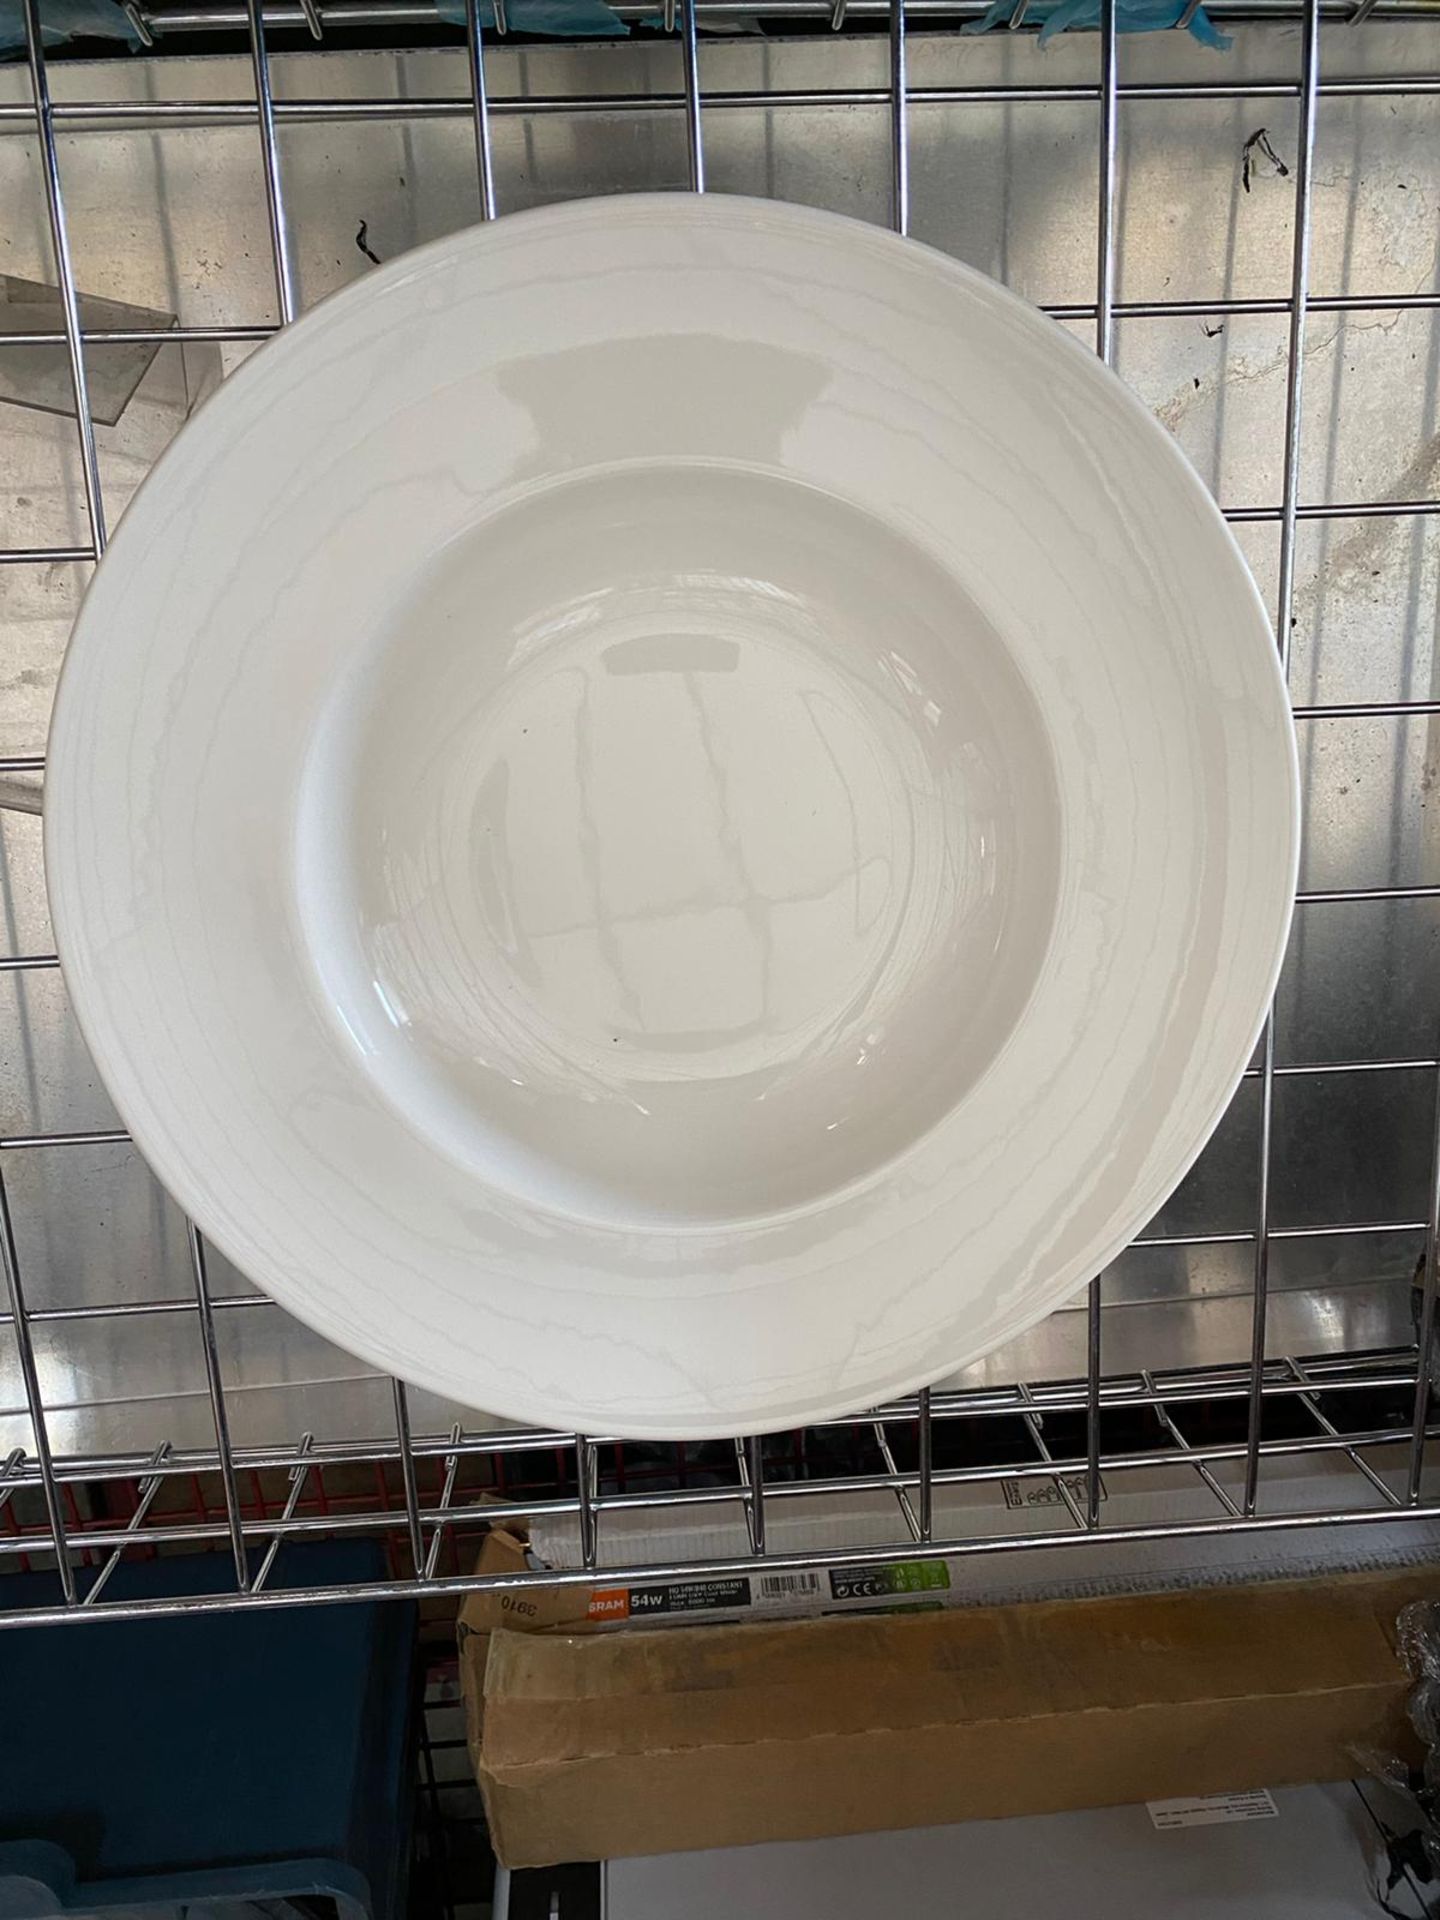 10 x Villeroy & Boch Royal Dinner Plate - 290mm - Ref: 1044122620 - New and unused without Box - - Image 2 of 5